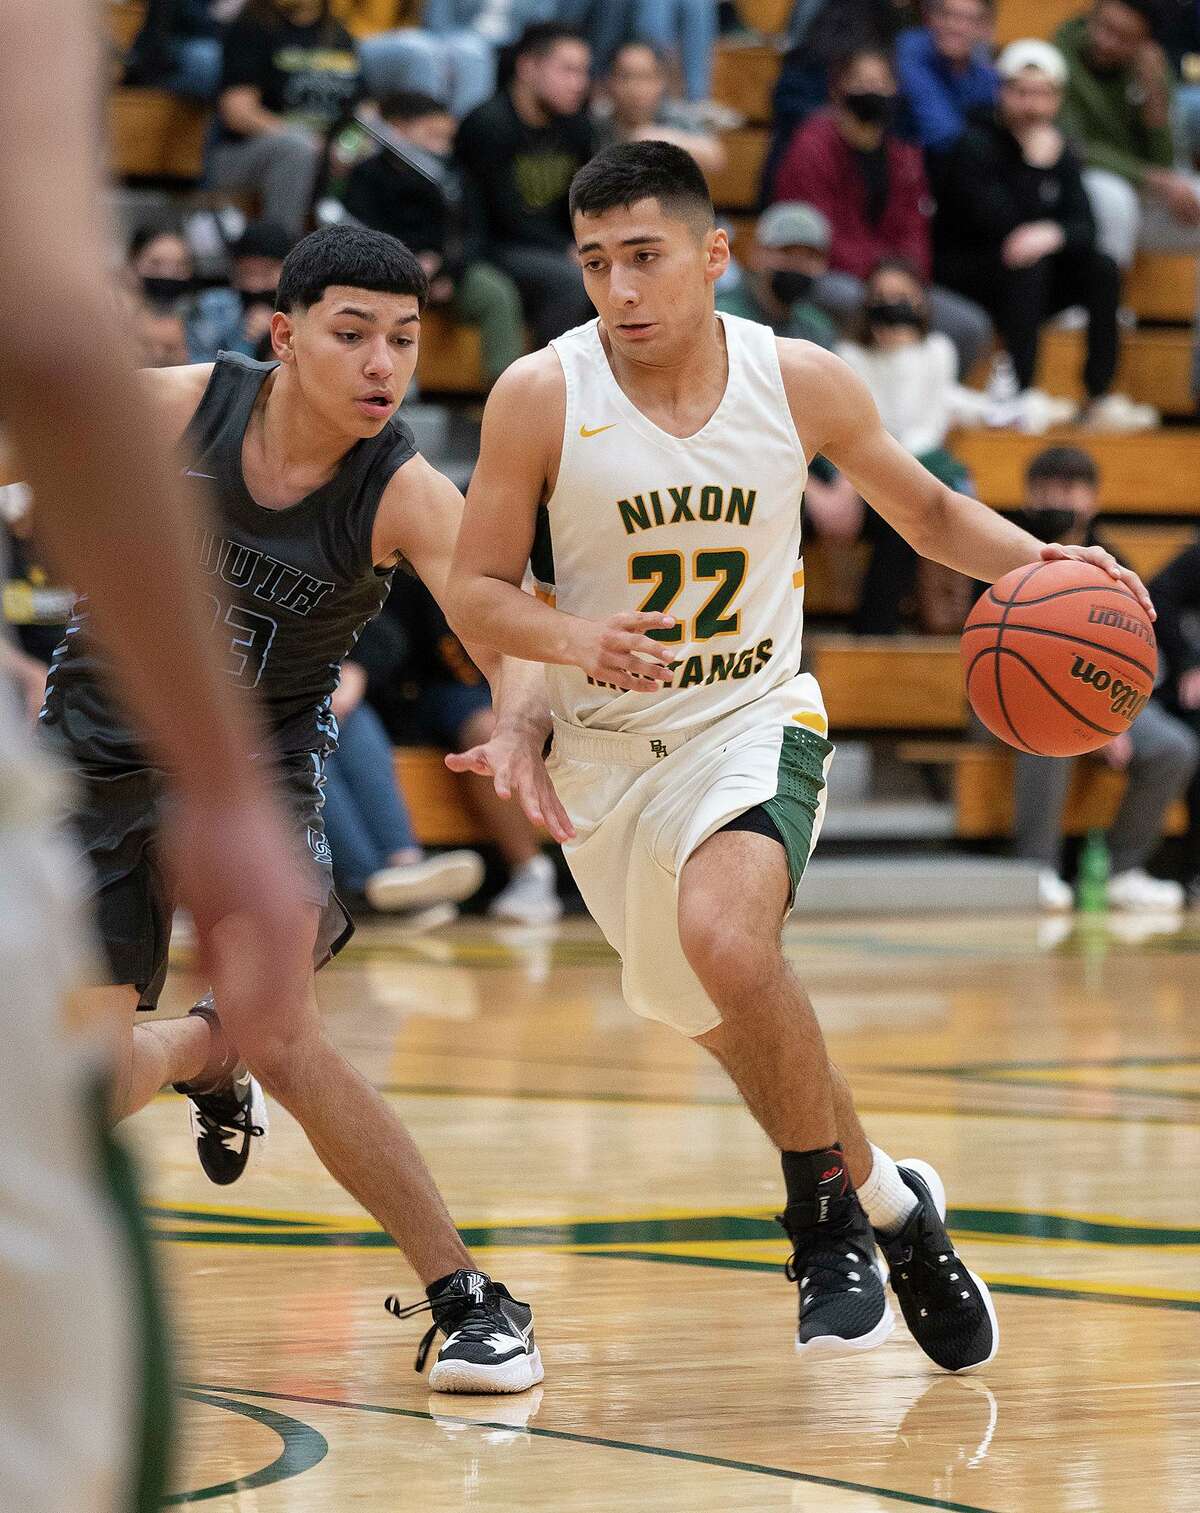 Nixon High School’s Adrien Medellin moves the ball down the court during a game against United South High School. Medellin finished with 23 points in the Mustang’s win over LBJ on Wednesday. Twelve of his points came from the free-throw line.